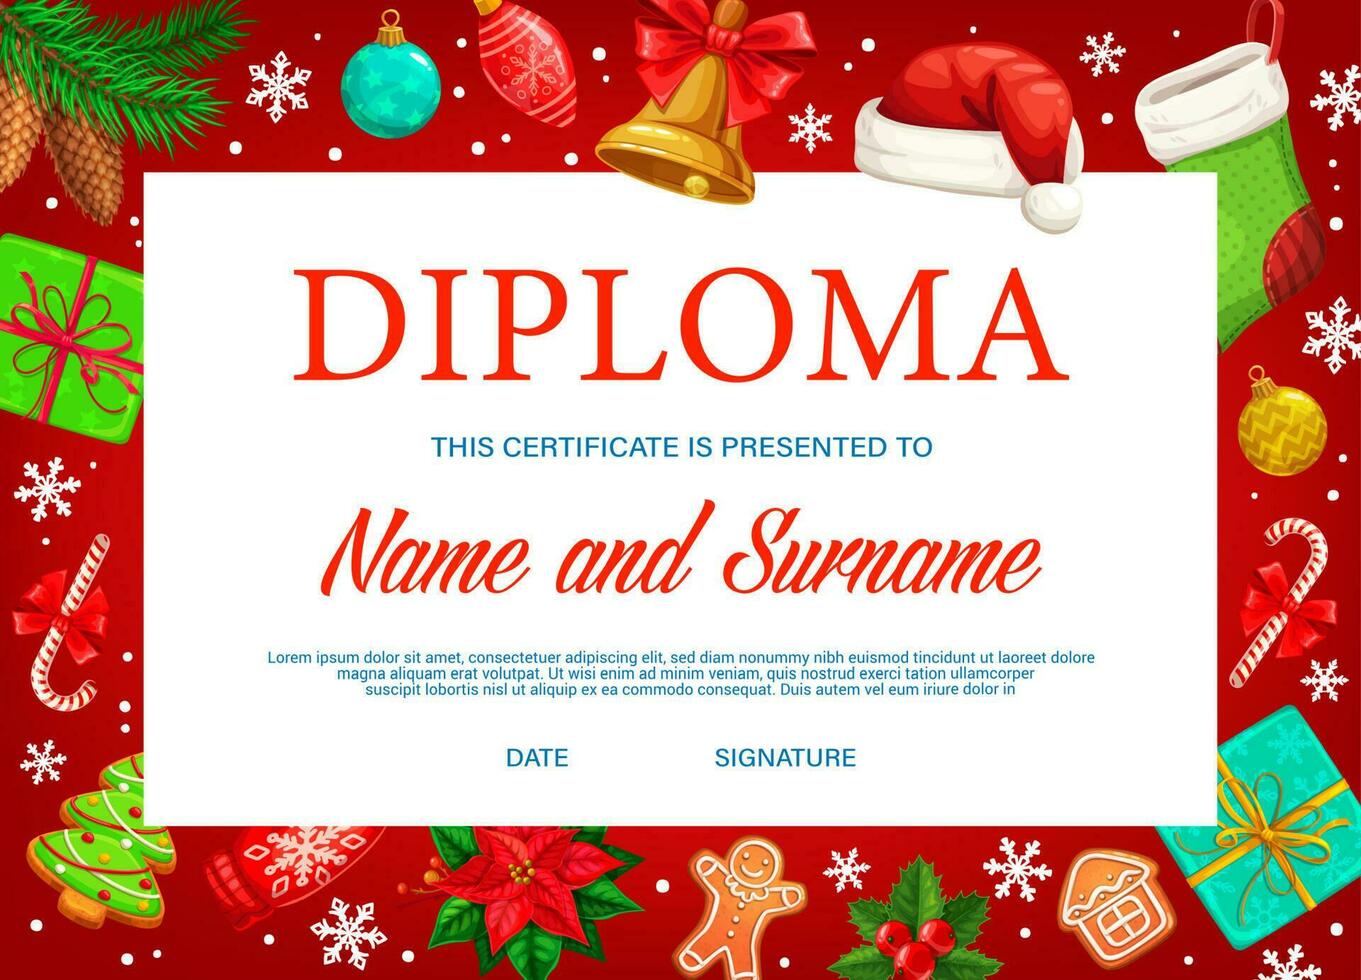 Education diploma certificate with Christmas gifts vector